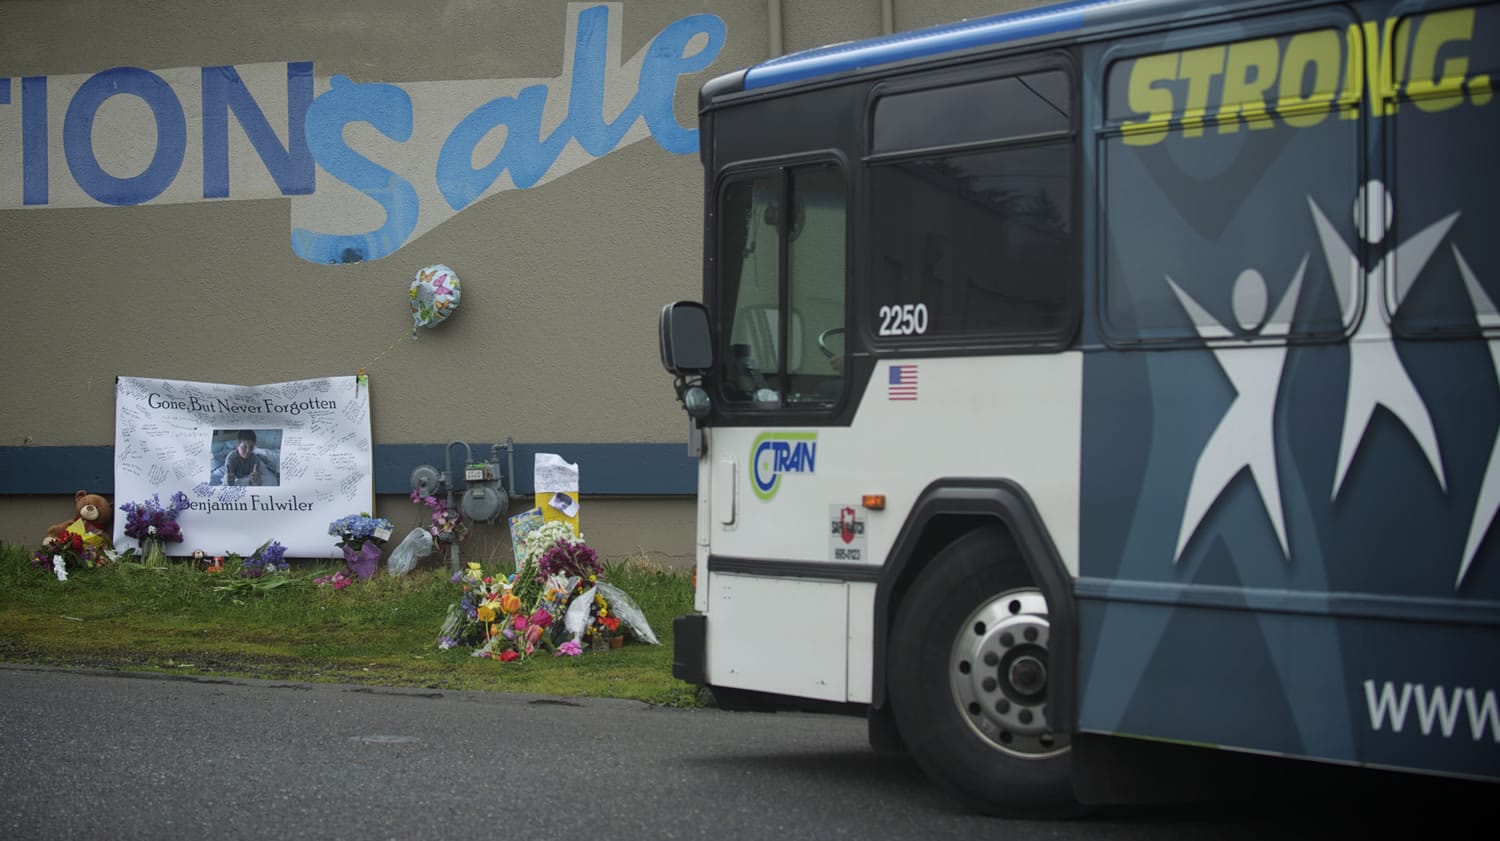 A C-Tran bus on Monday passes the site where 11-year-old Benjamin Fulwiler collided with a C-Tran on Saturday.